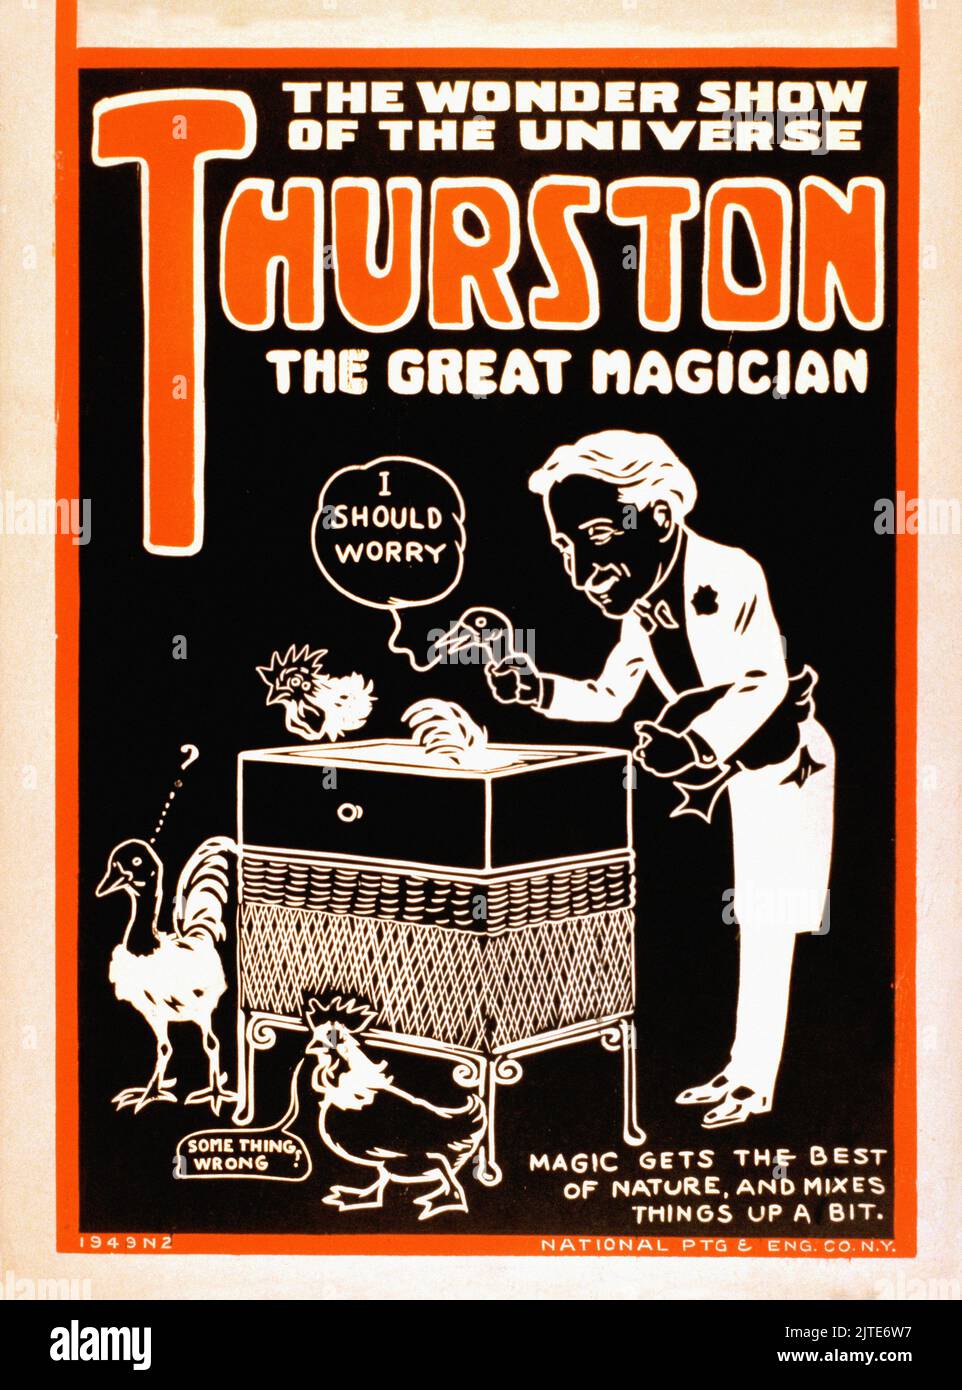 Vintage 1920s Magician Poster - Thurston, The Great Magician, The Wonder Show of the Universe. C. 1925 Stock Photo